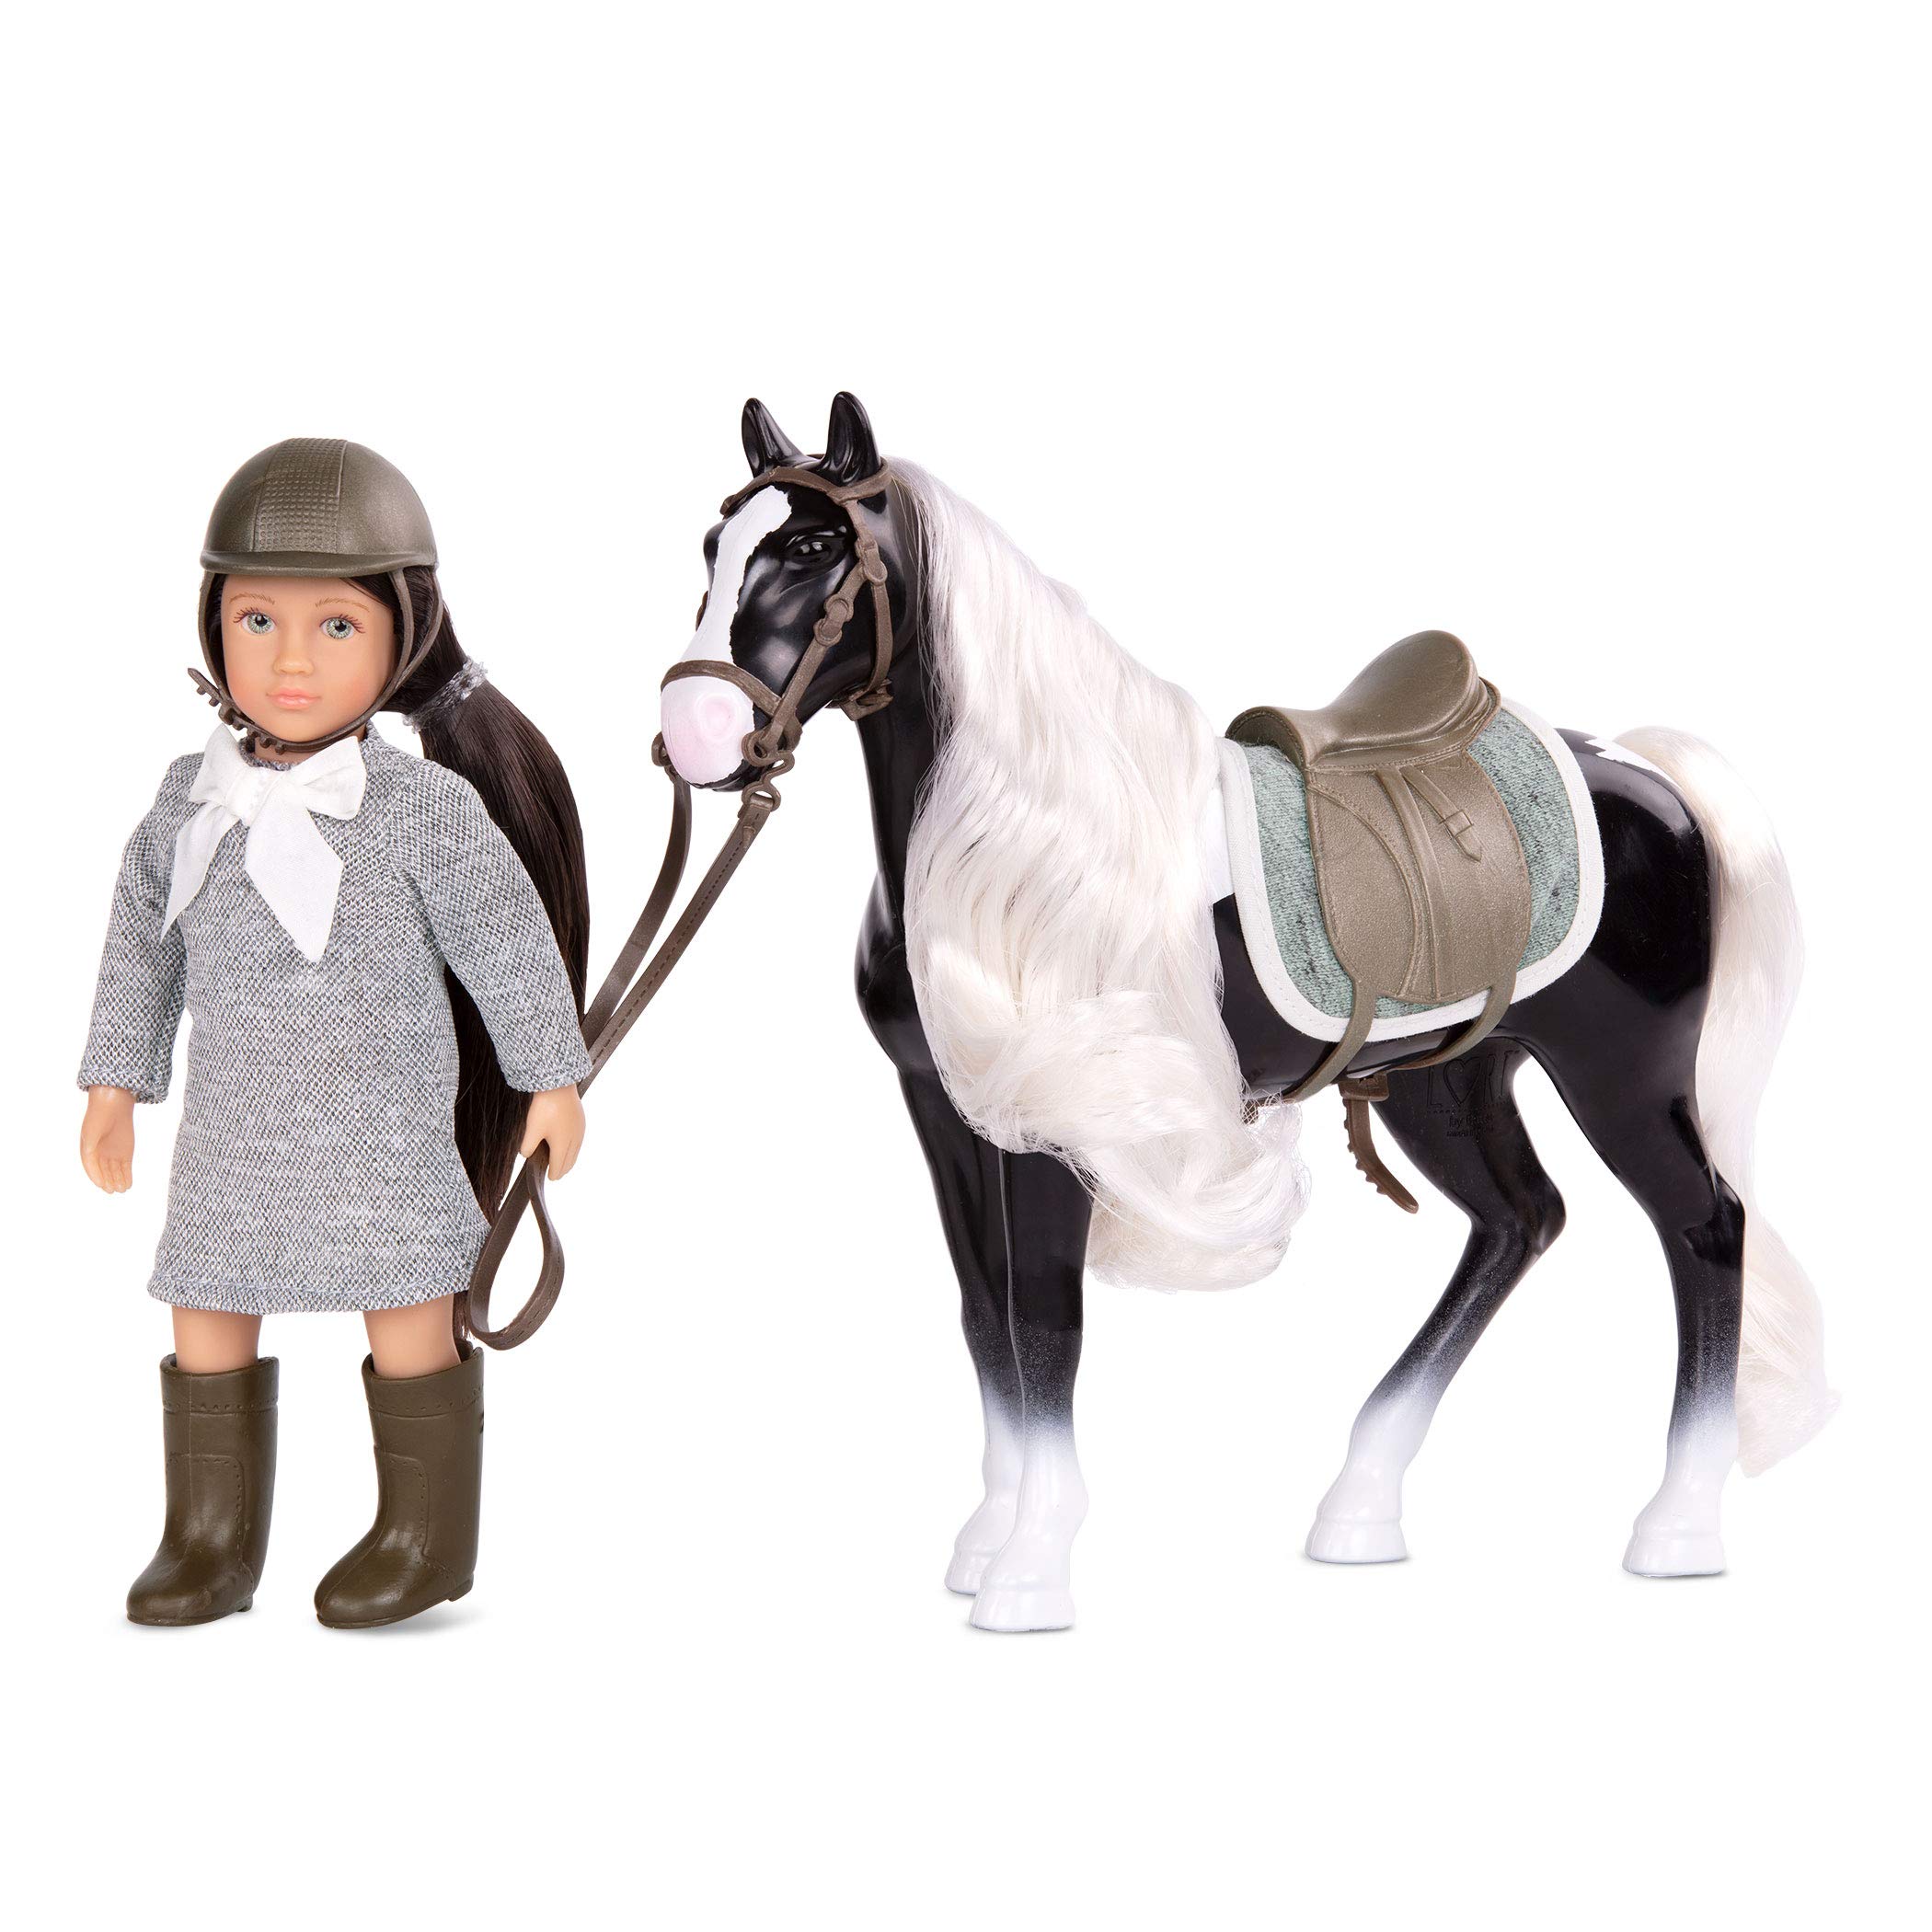 Lori Dolls – Mini Doll & Toy Horse – Small 6-inch Doll & Gypsy Vanner Horse – Set with Clothes, Animal & Accessories – Playset for Kids – Ansley & Arabel – 3 Years +